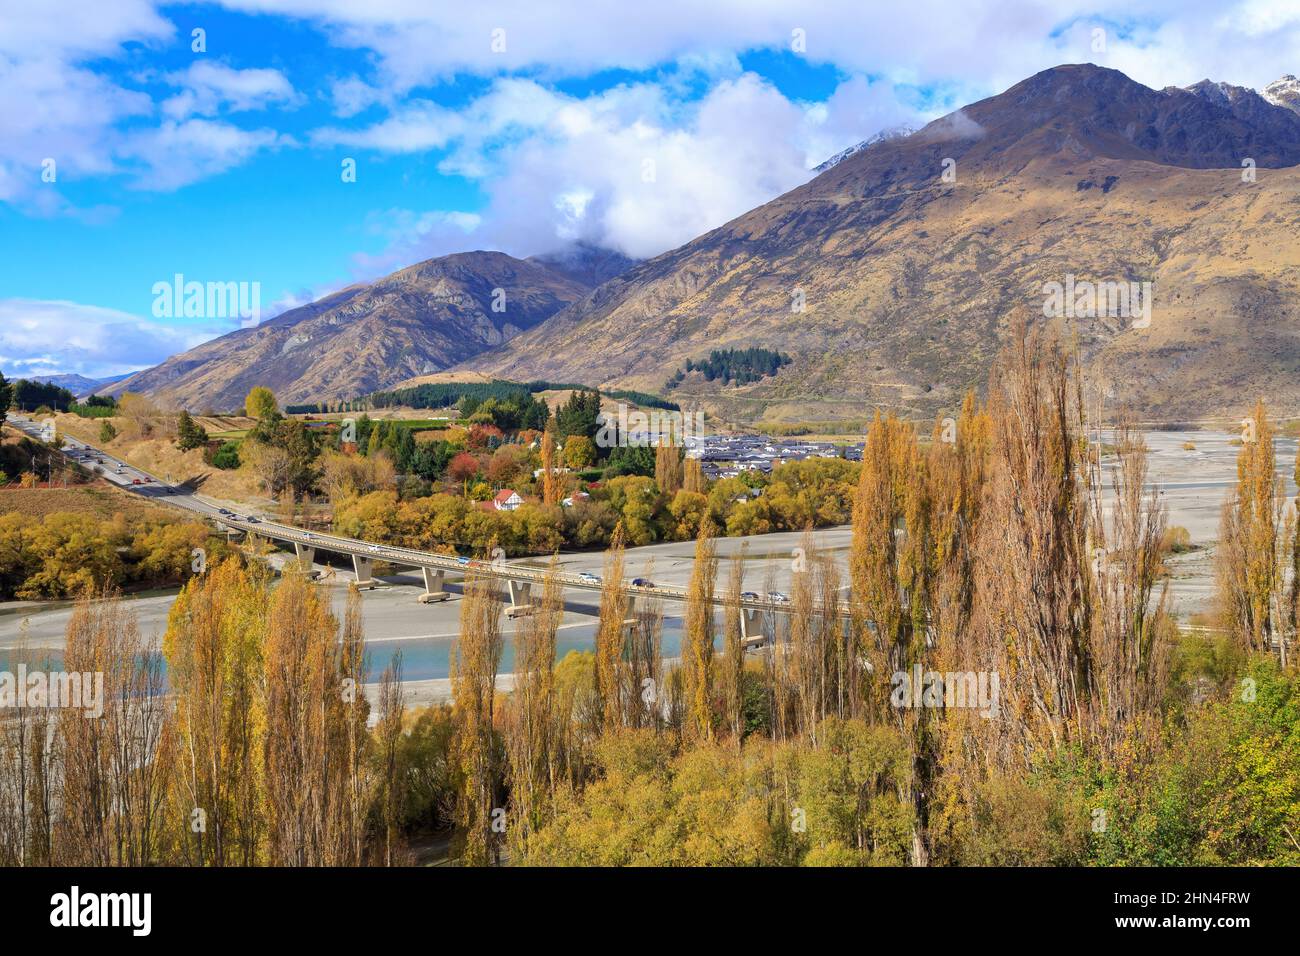 Autumn landscape near Queenstown, New Zealand. A road bridge crosses the Shotover River. At right is the Remarkables mountain range Stock Photo